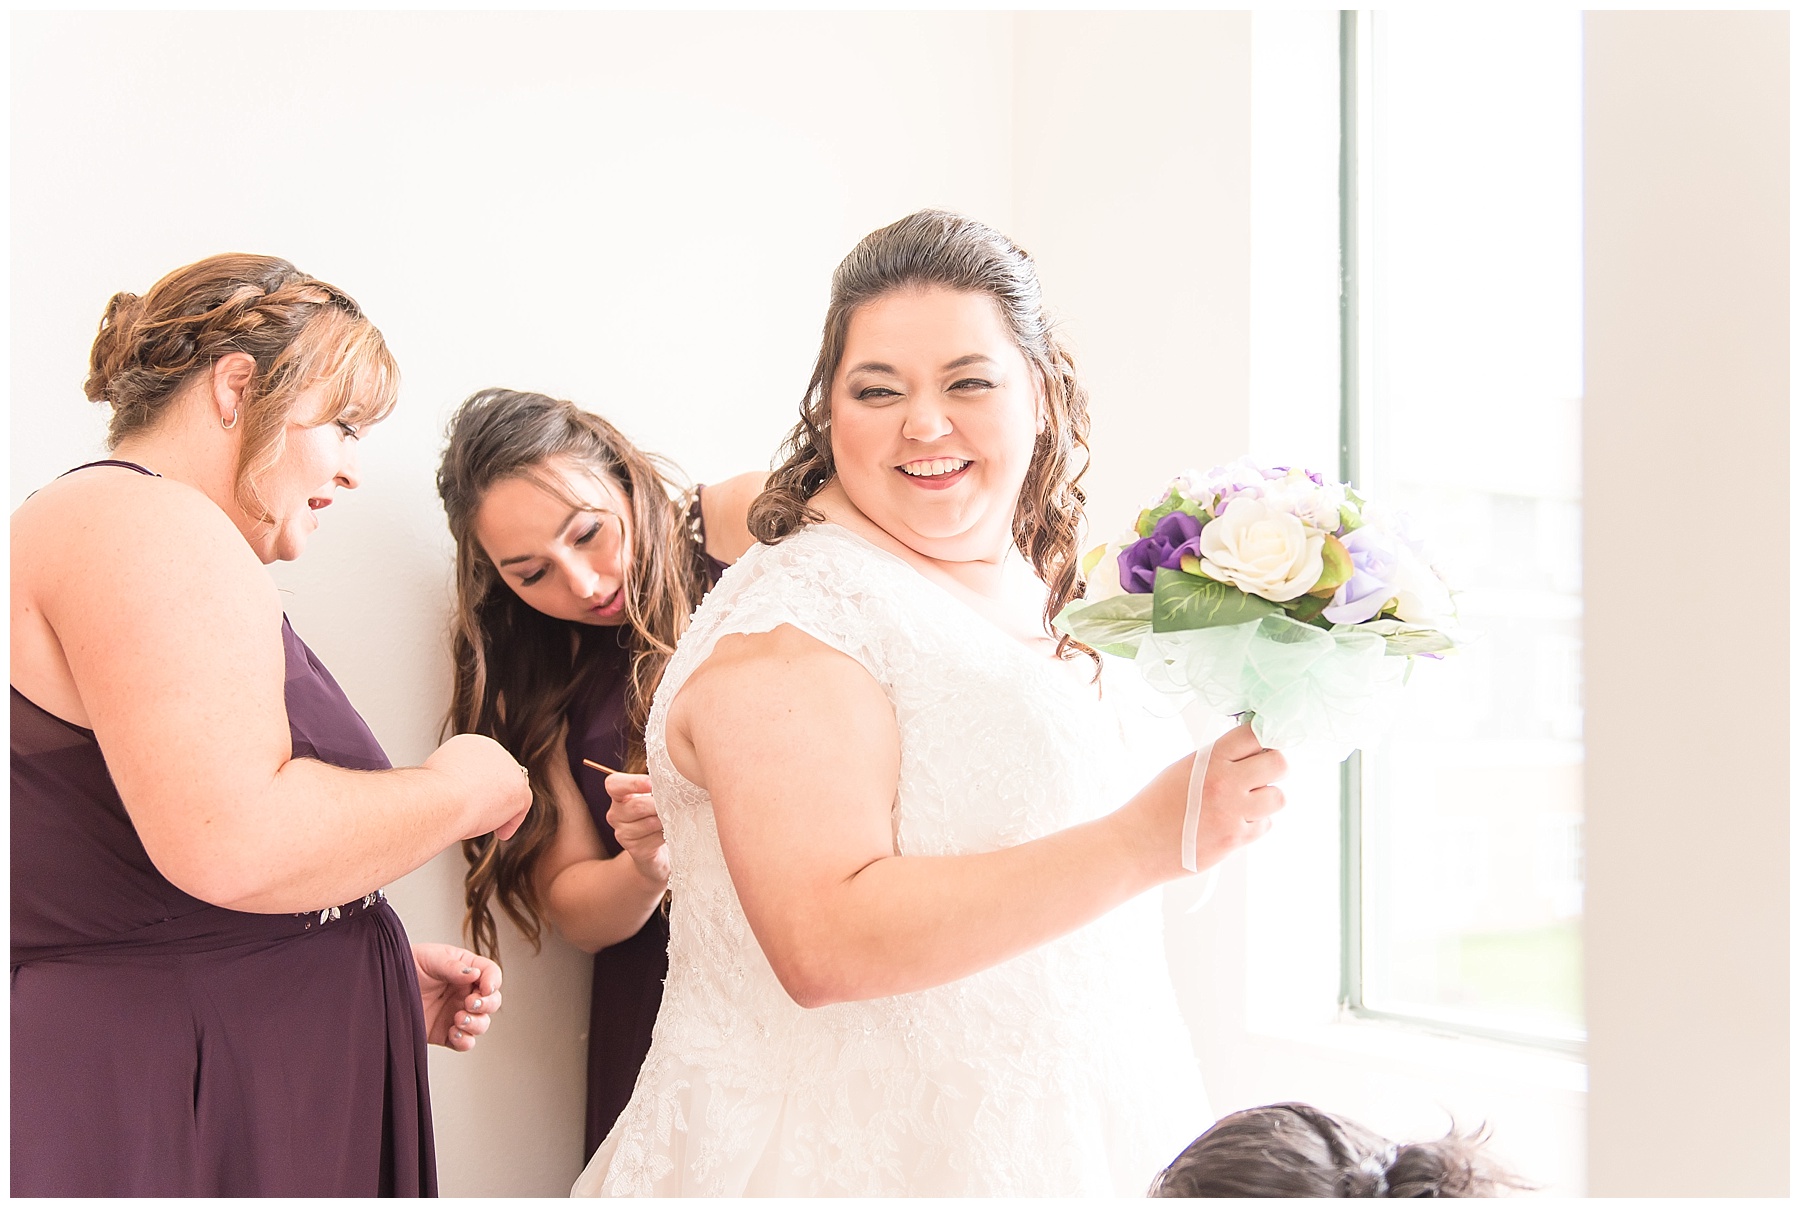 Bride smiling over shoulder as bridesmaids button her lace wedding dress